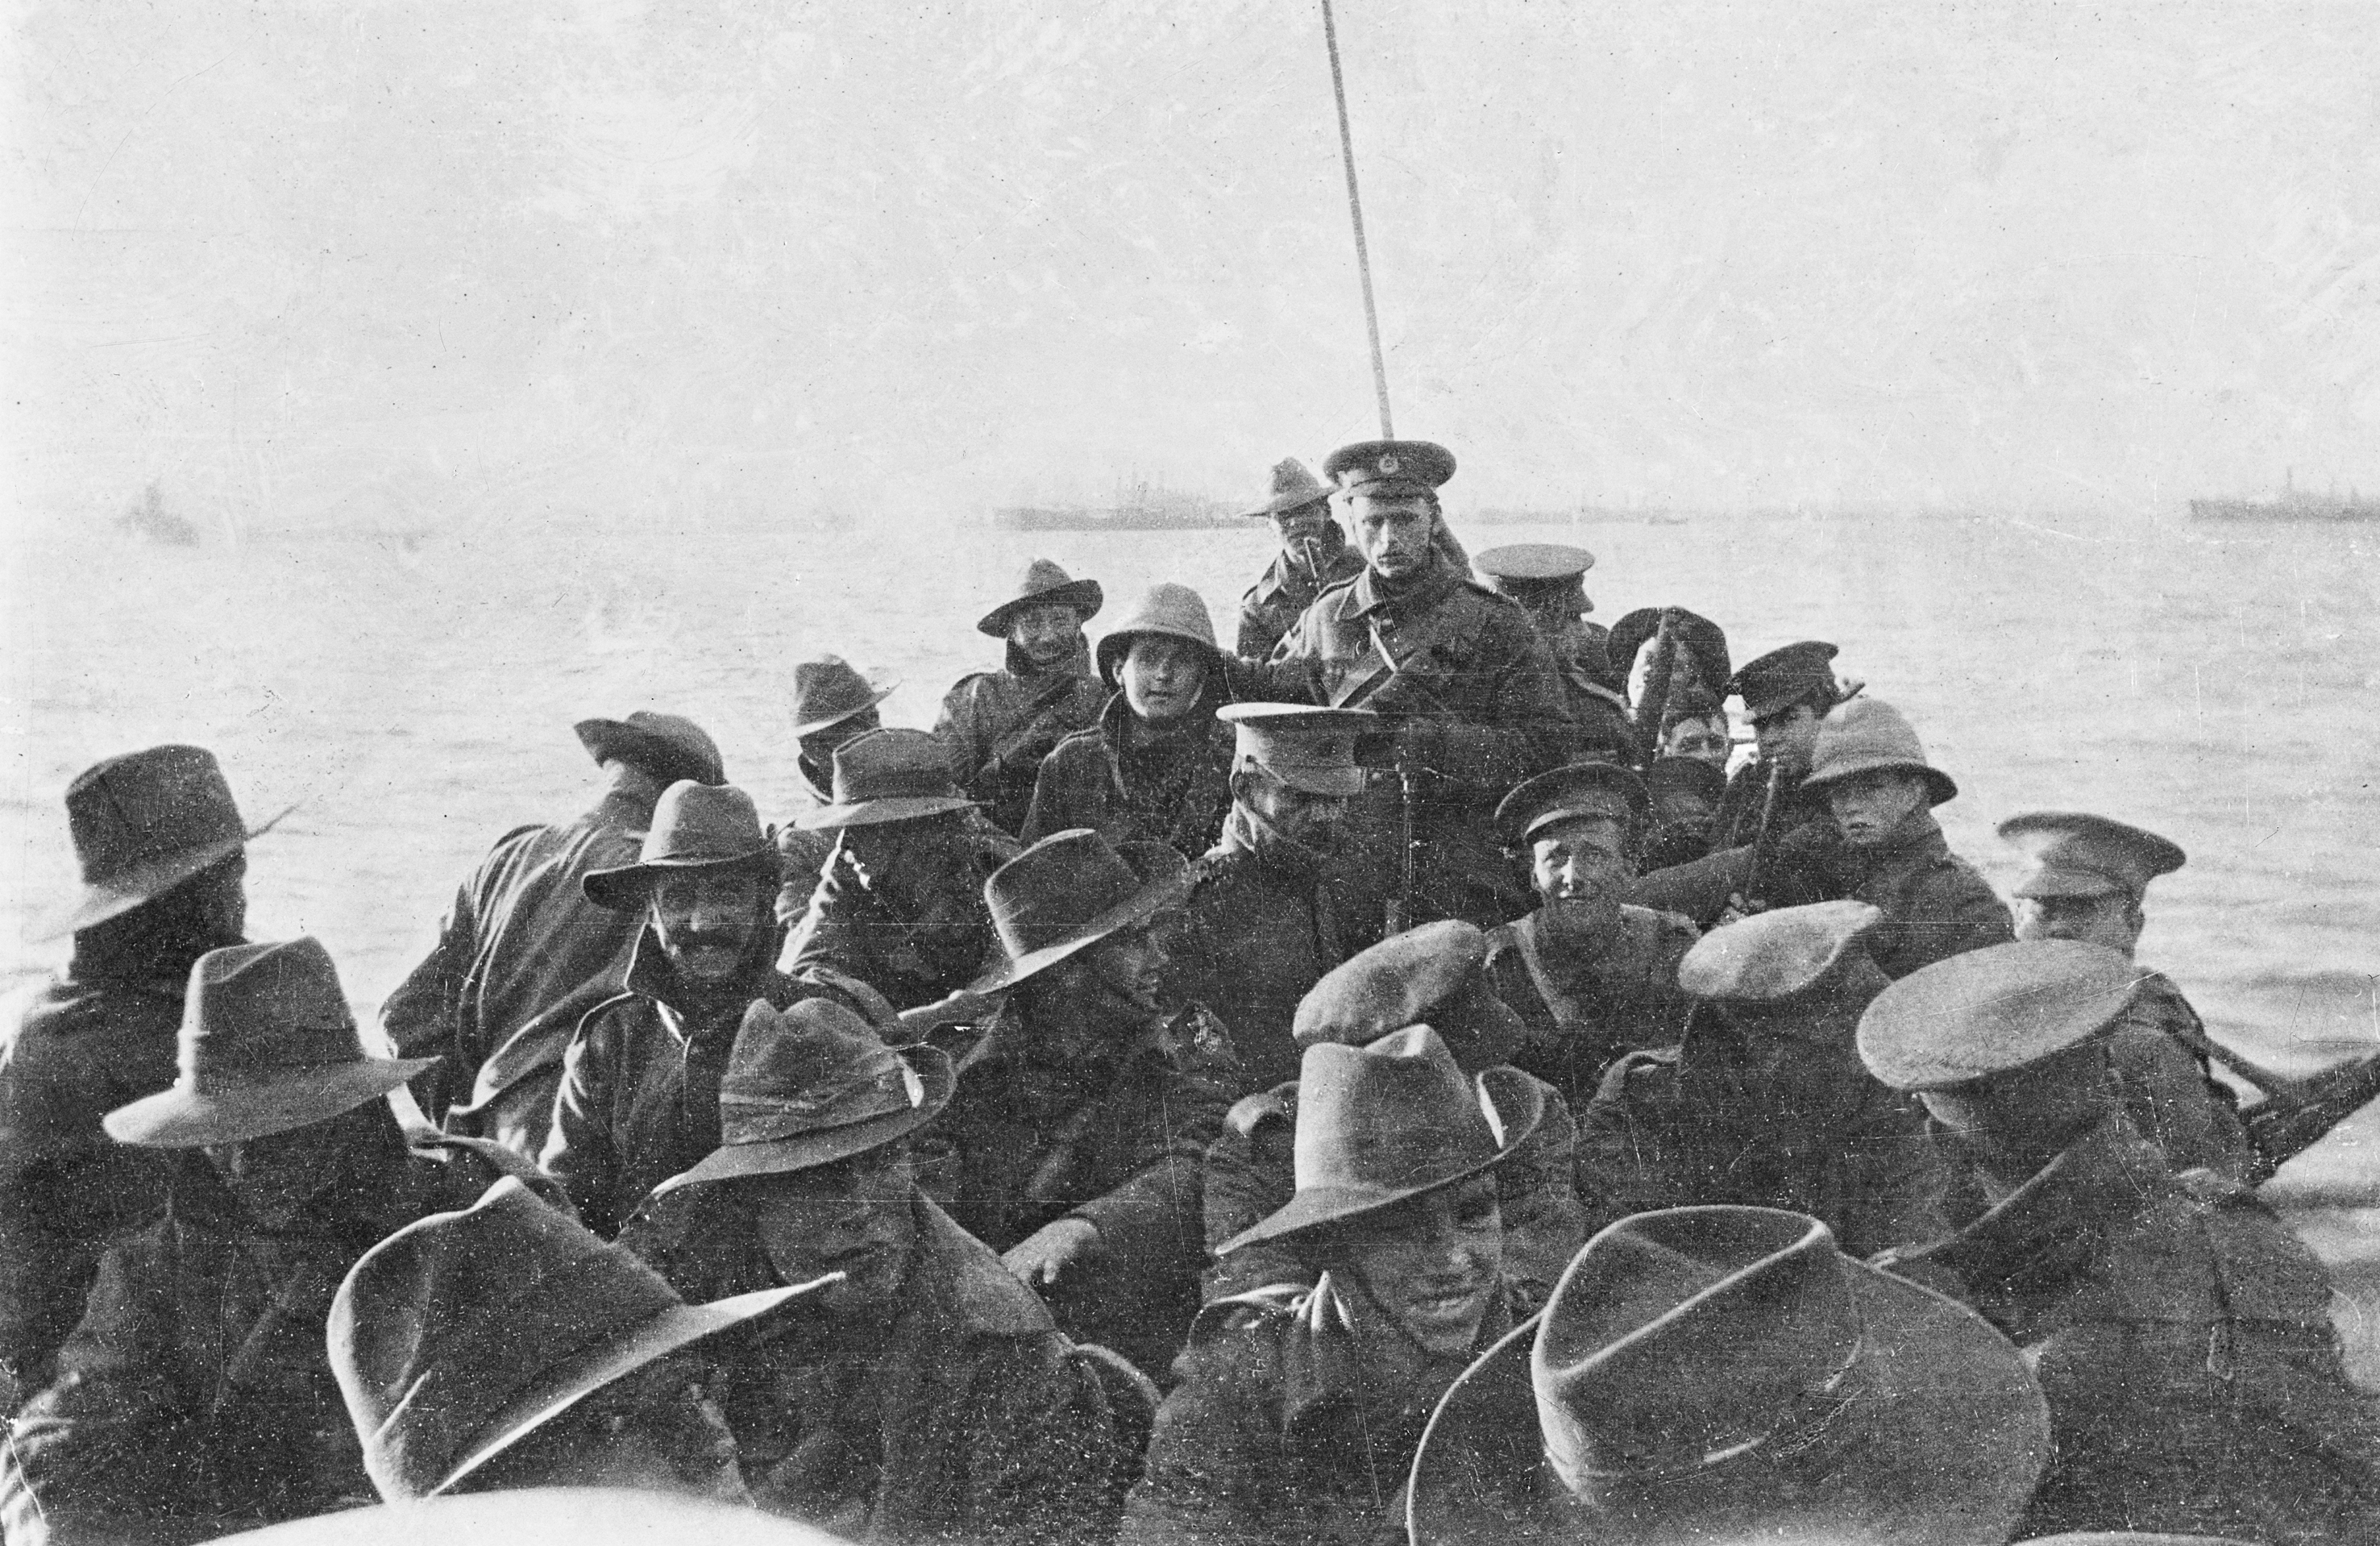 Figure 2: unidentified men from the 1st Divisional Signal Company being towed towards Anzac Cove on the morning of 25 April 1915.